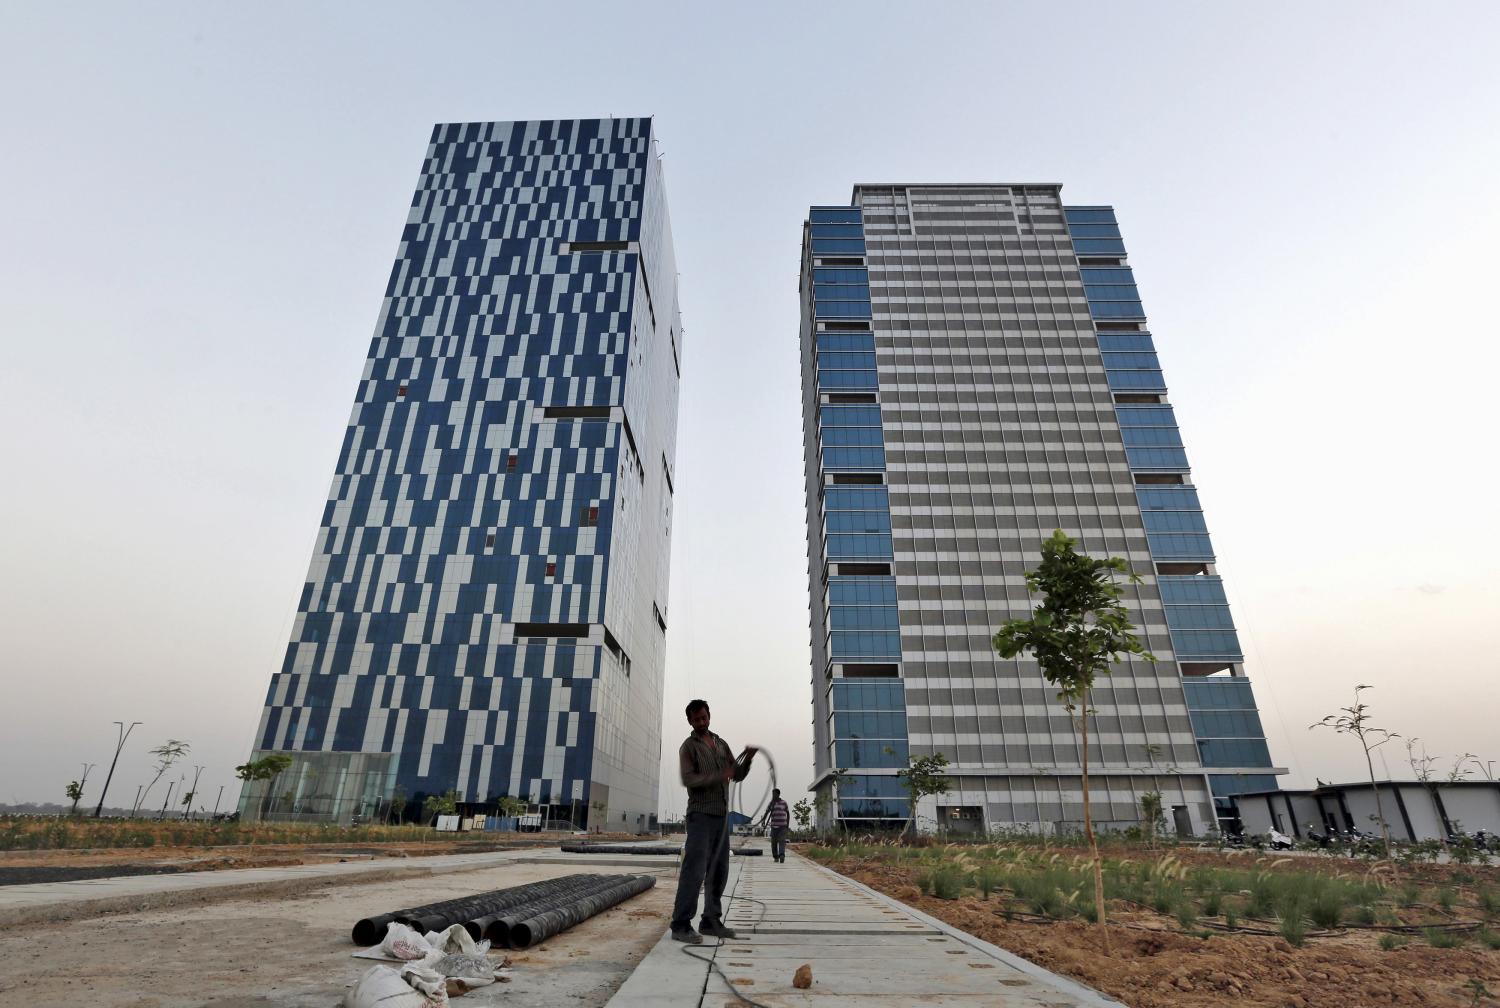 A worker folds cable of welding machine in front of two office buildings at Gujarat International Finance Tec-City at Gandhinagar, in Gujarat